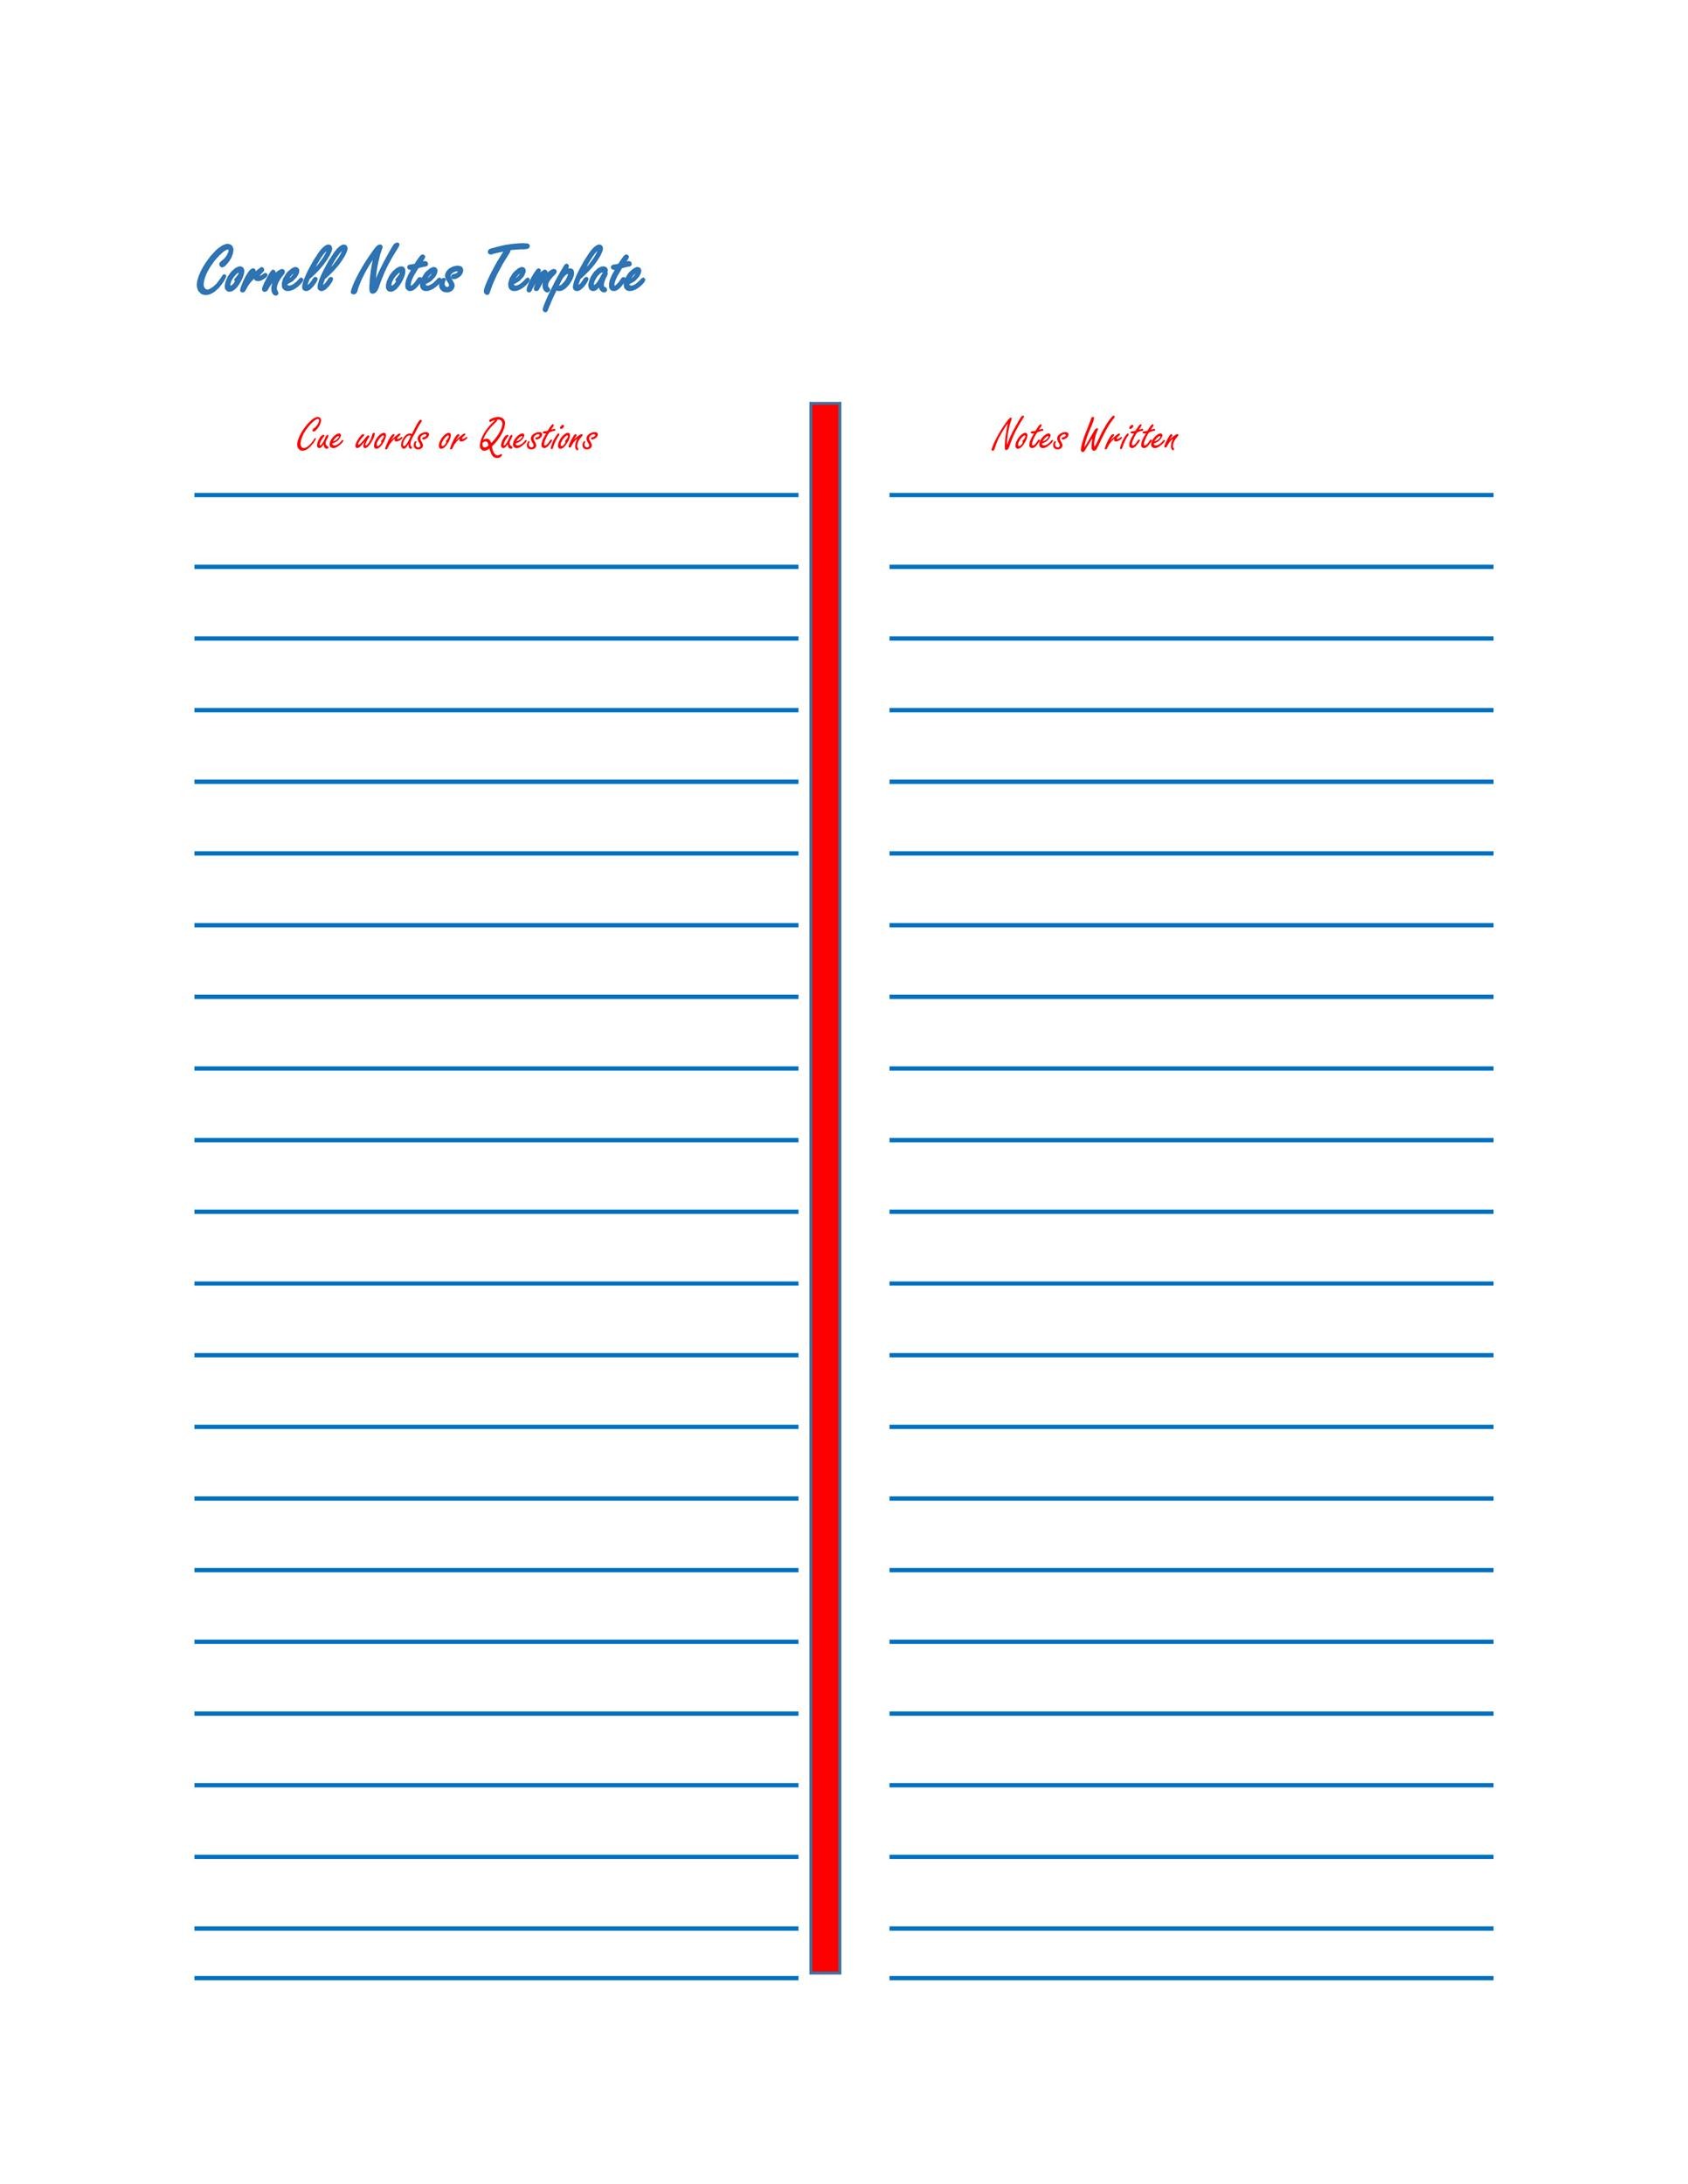 Cornell Note Template Word